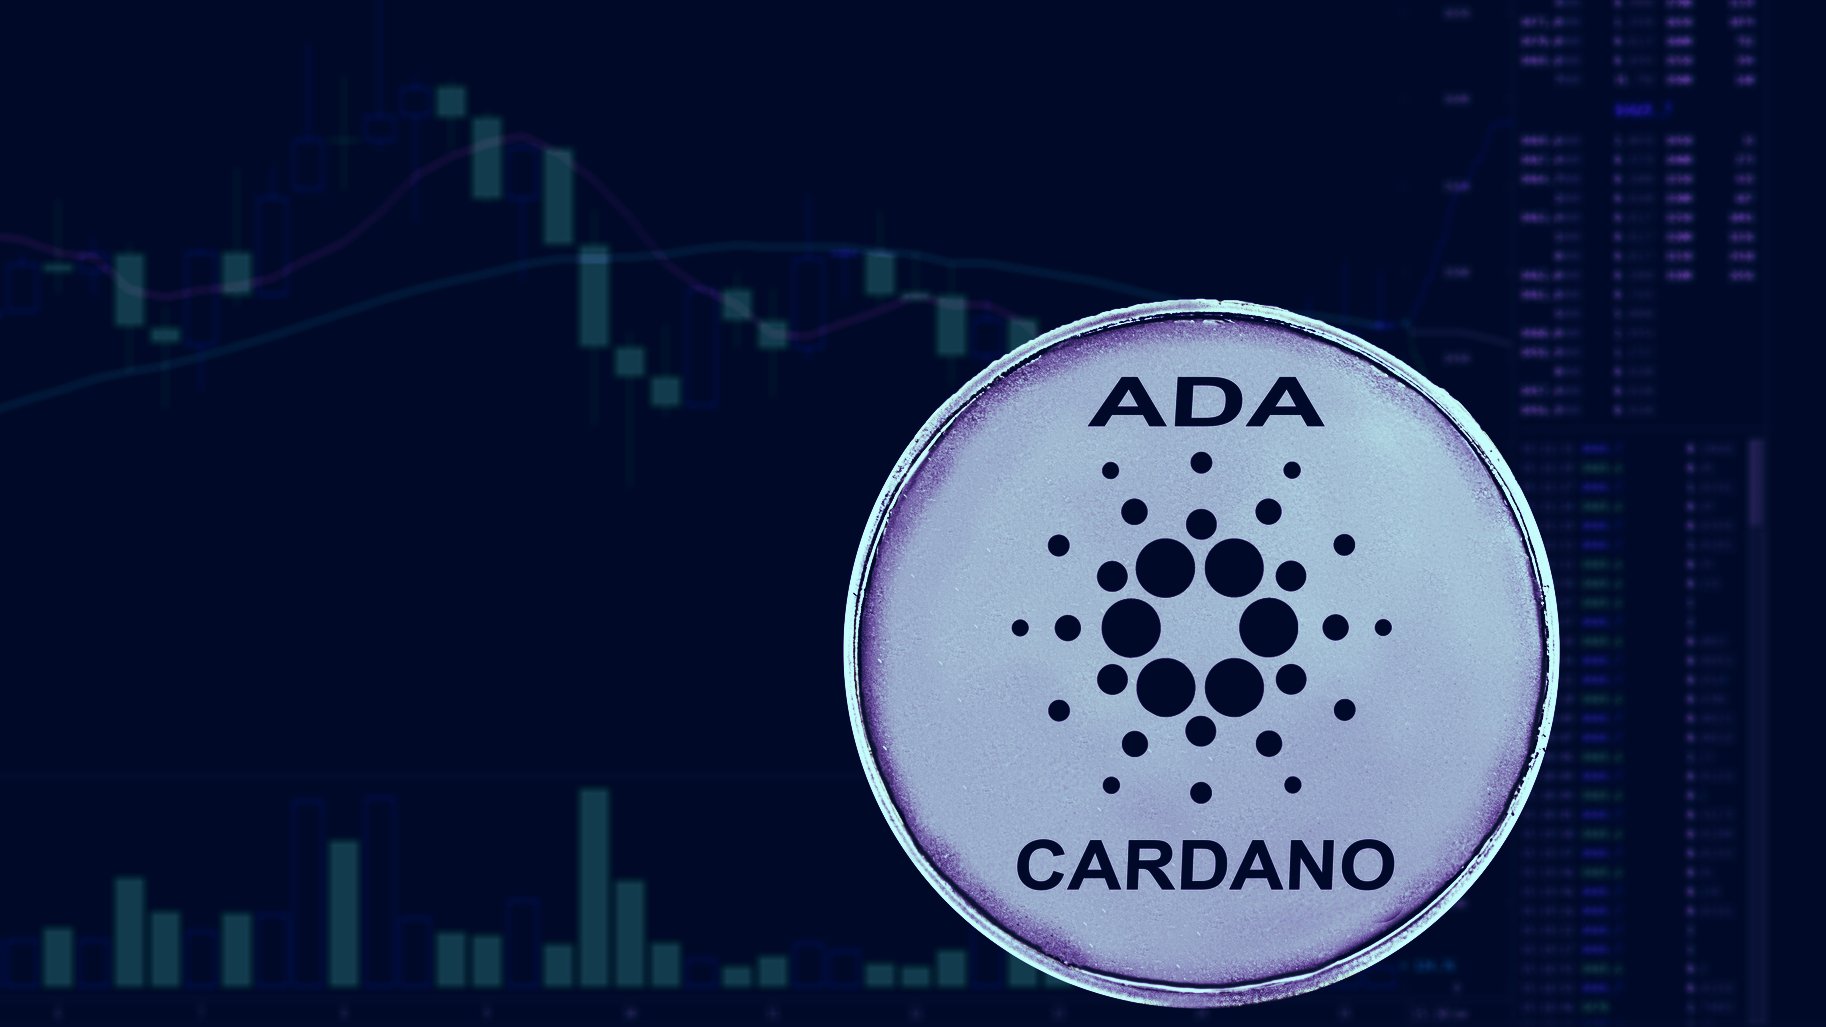 Picture of a Cardano coin in front of a candlestick chart